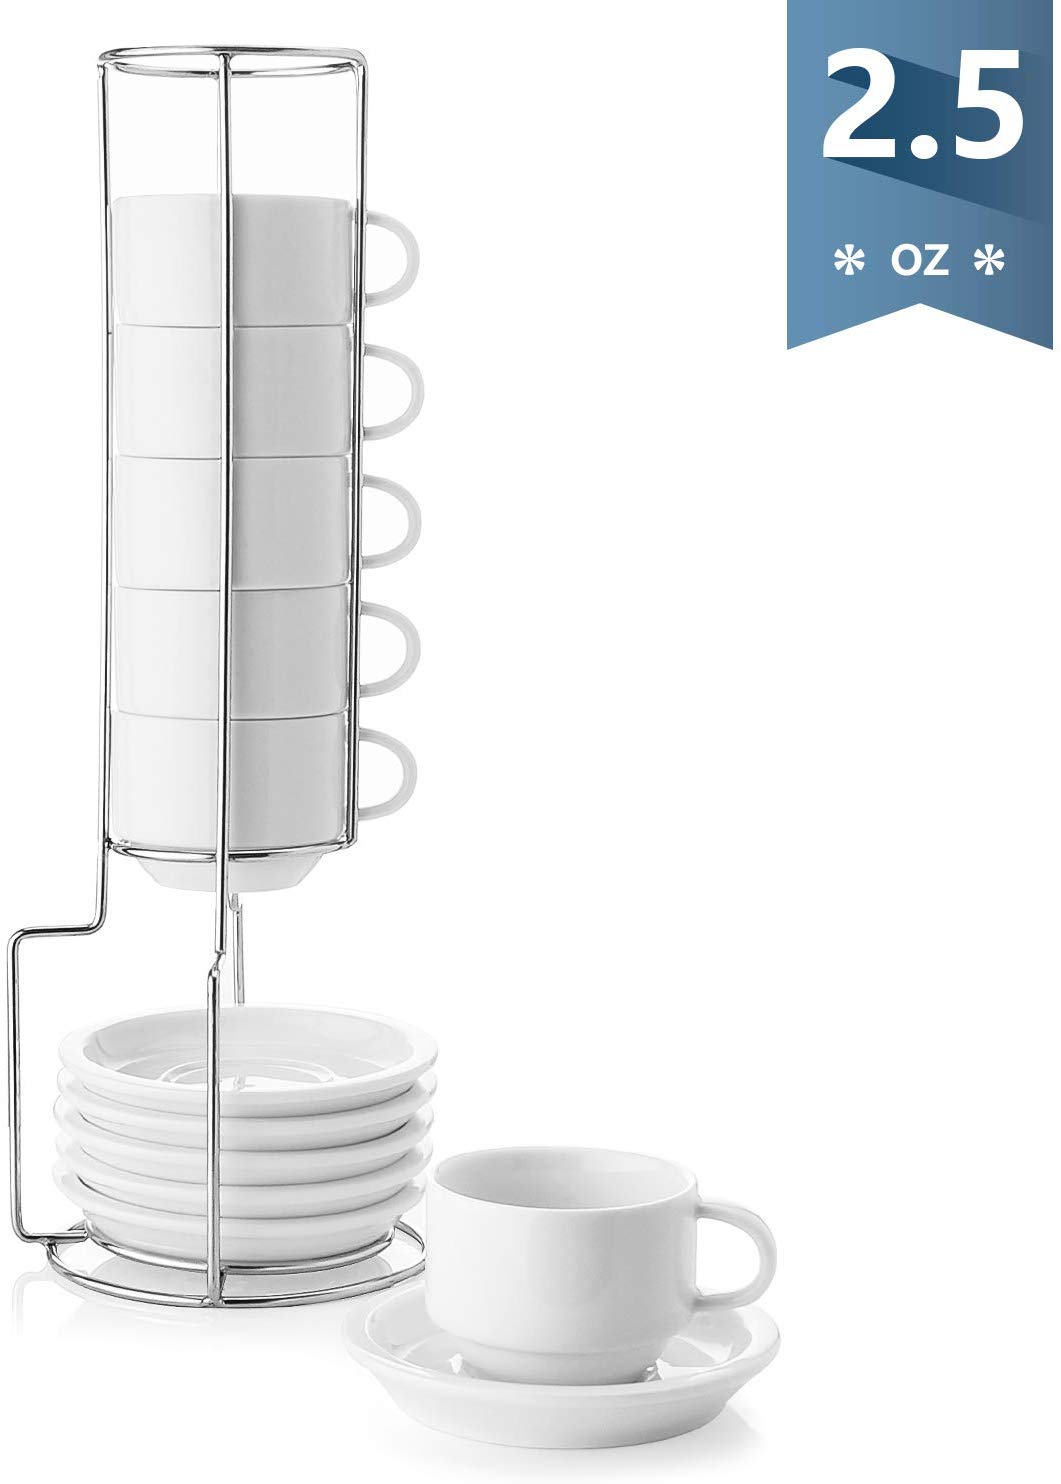 https://www.dontwasteyourmoney.com/wp-content/uploads/2020/02/sweese-stackable-espresso-cups-with-saucers-set-of-6-espresso-cup.jpg